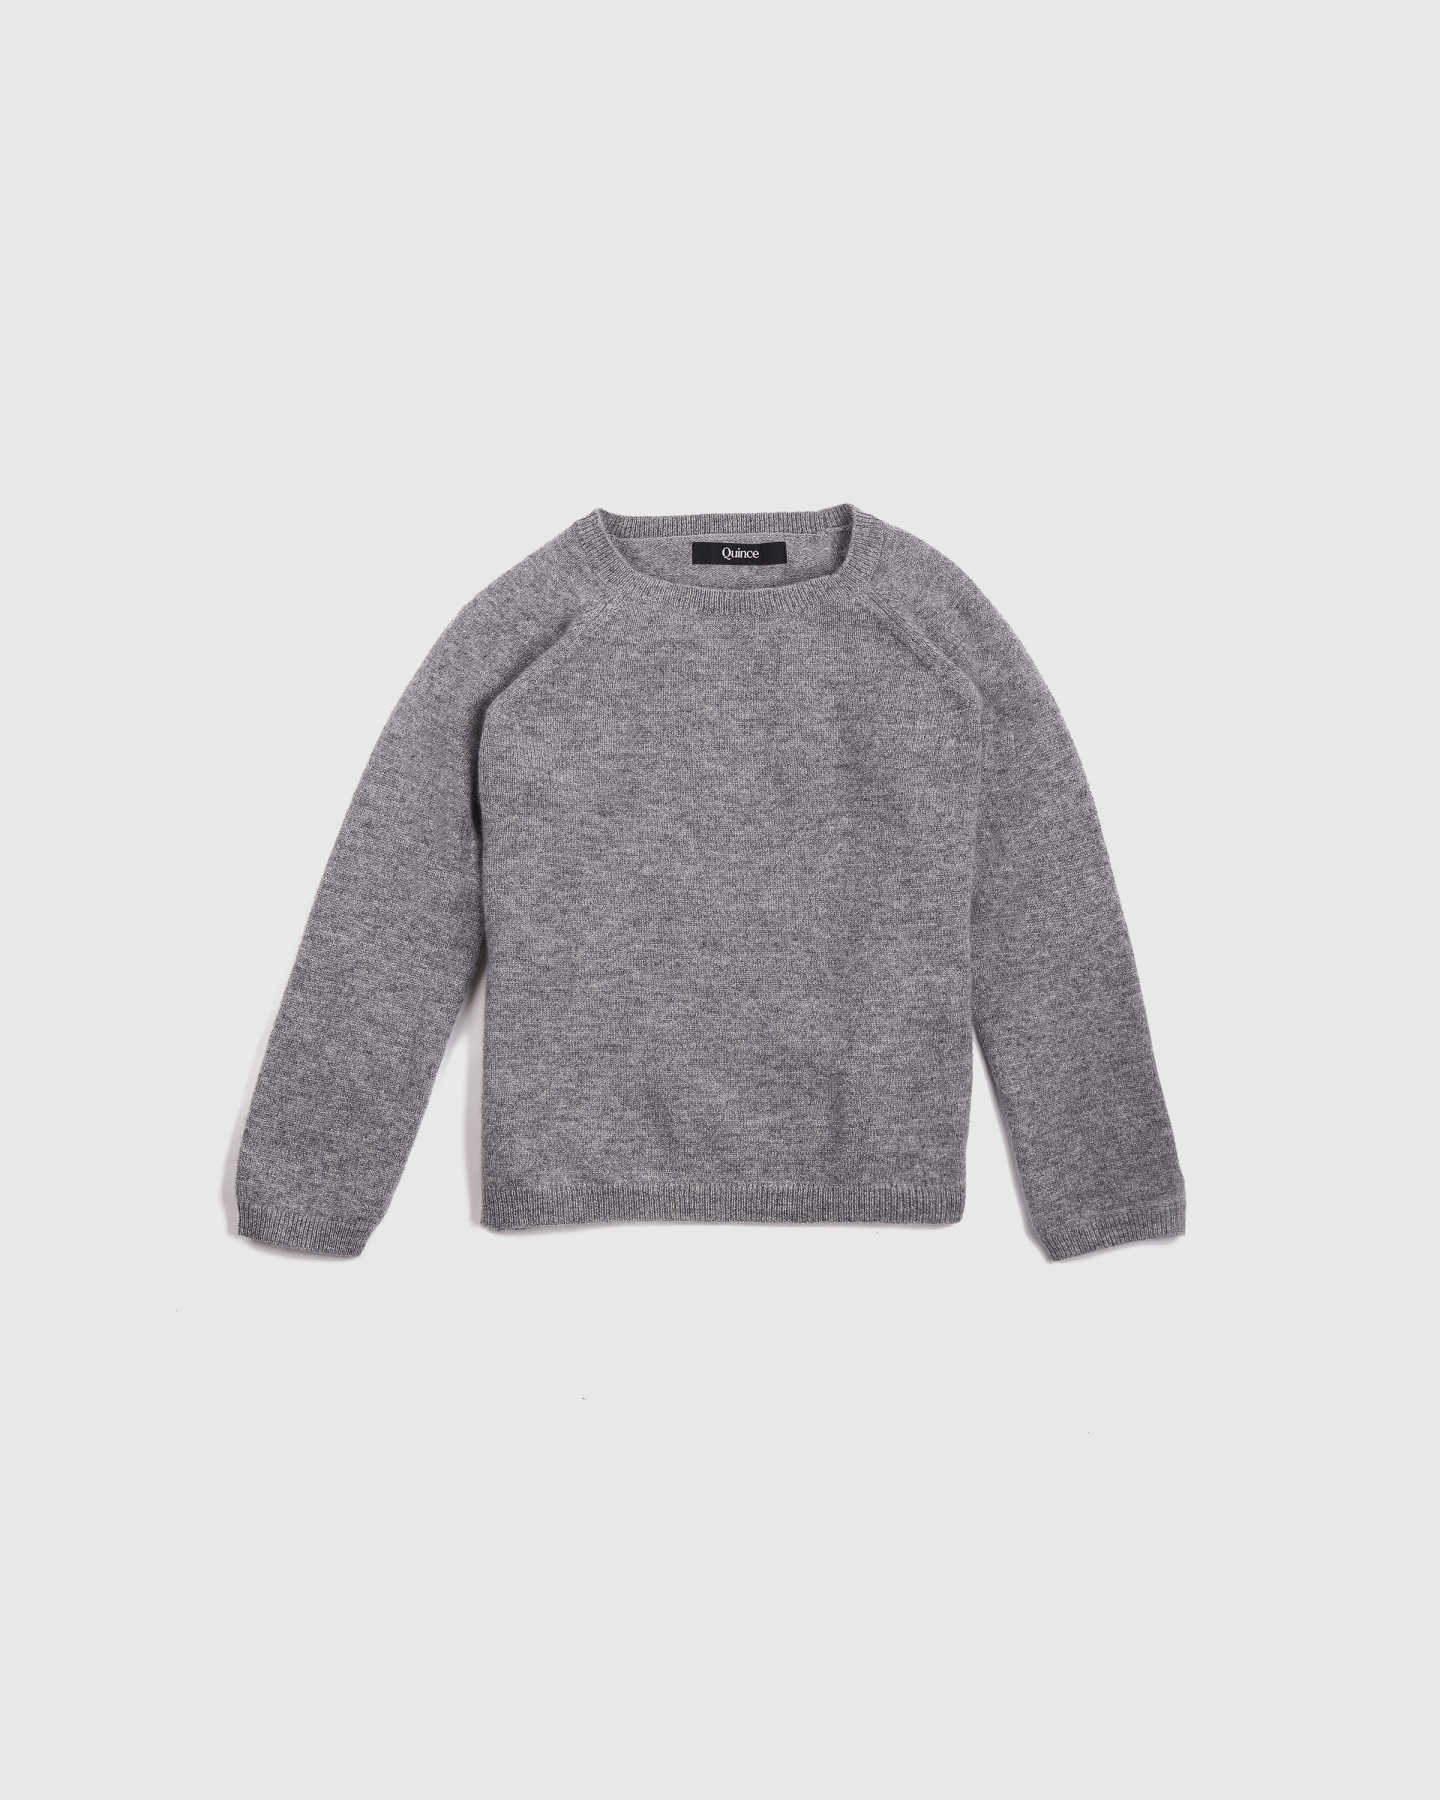 You May Also Like - Mongolian Cashmere Toddler Pullover - Heather Grey